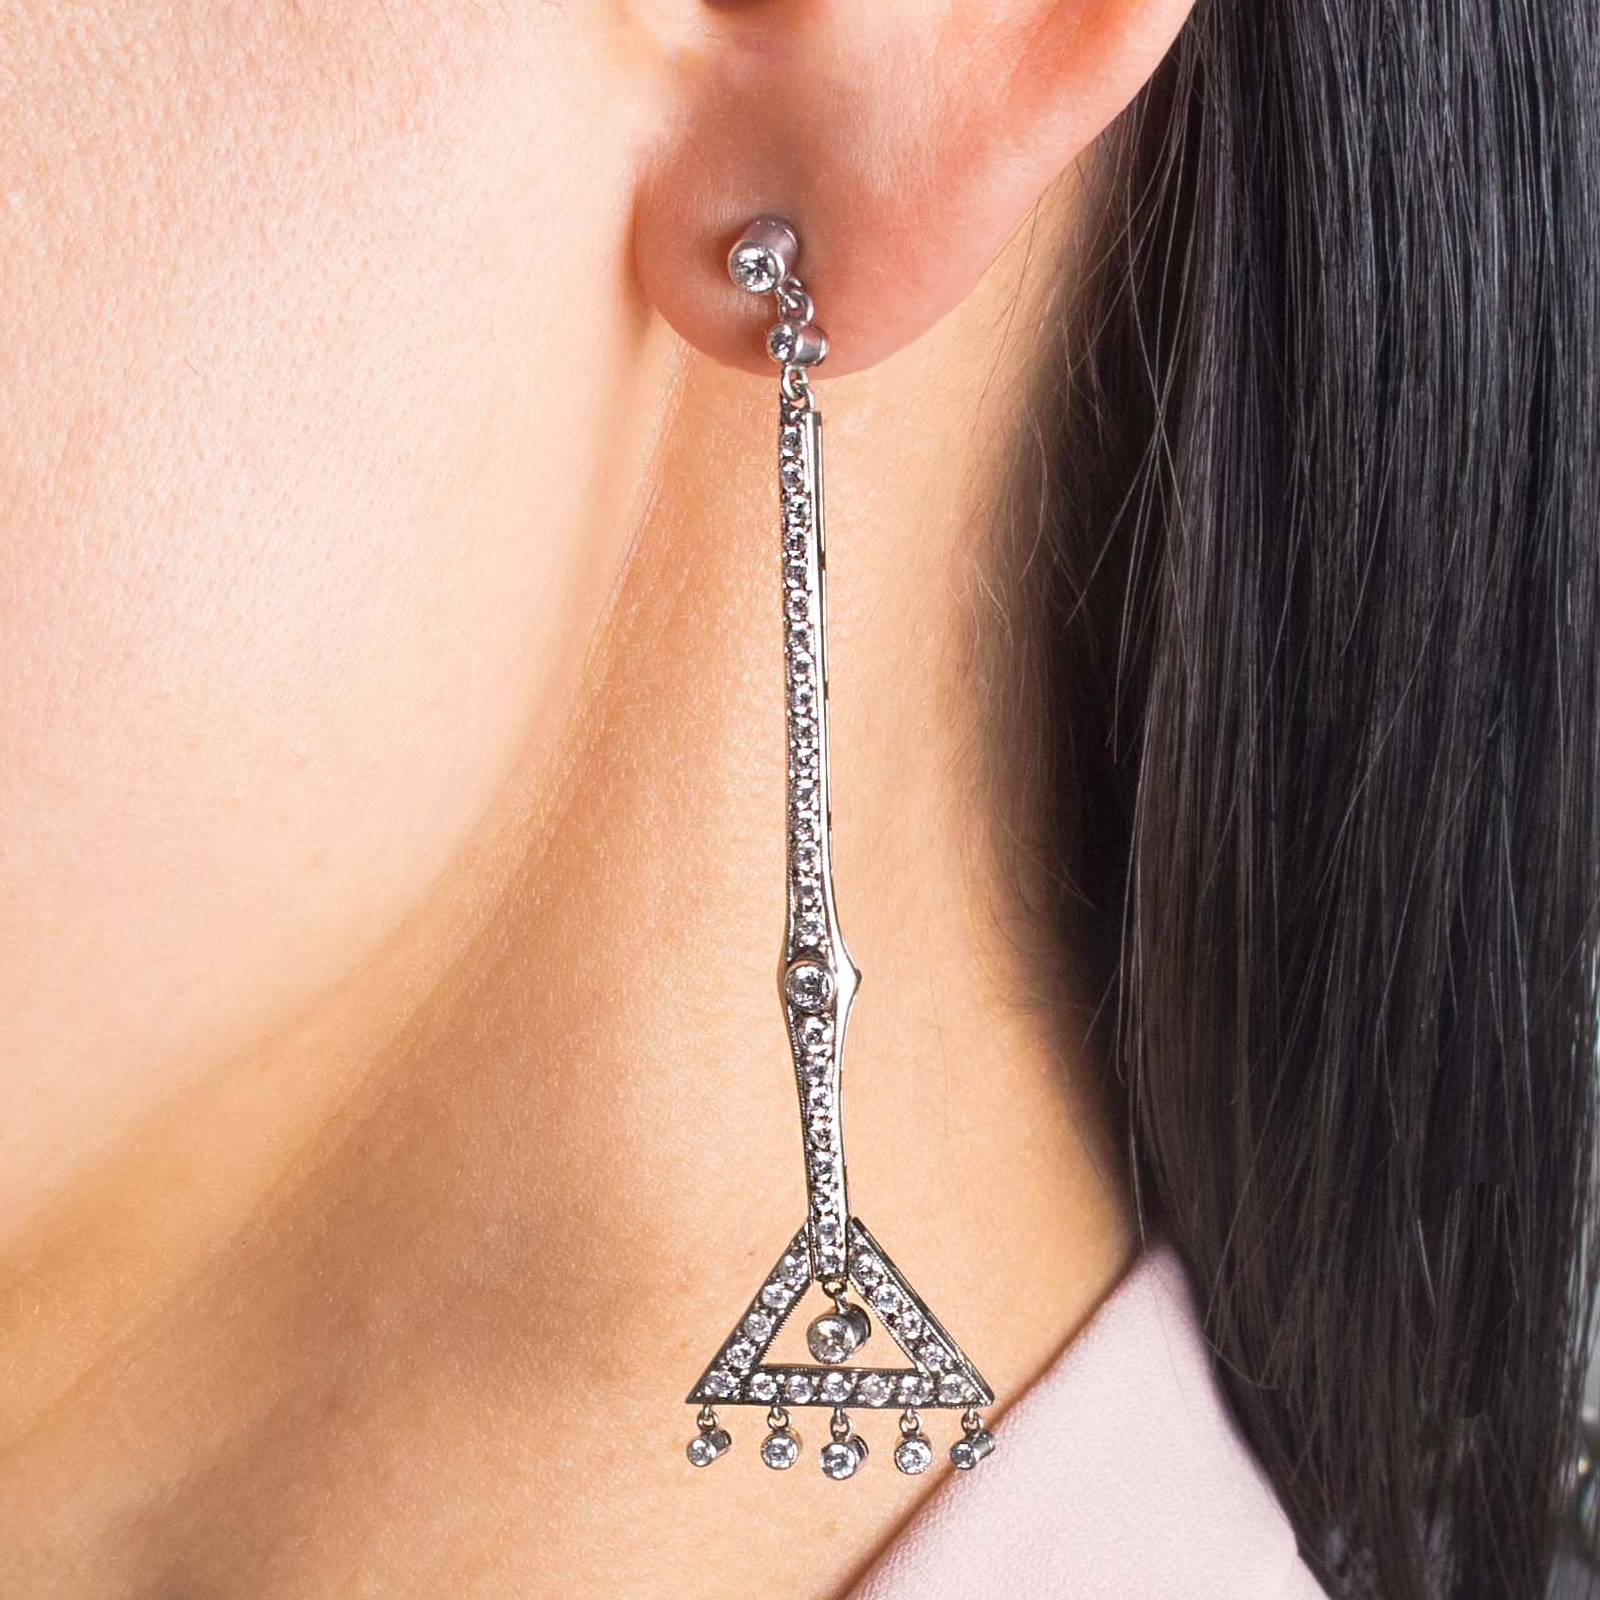 A gorgeous pair of hand crafted Art Deco earrings set in Platinum, with 114 Diamonds totalling 1.95 carats. 

The Diamonds are bead and bezel set with refined millegrain detailing. Safety spring disc Platinum backs on posts. Elegant and cleverly